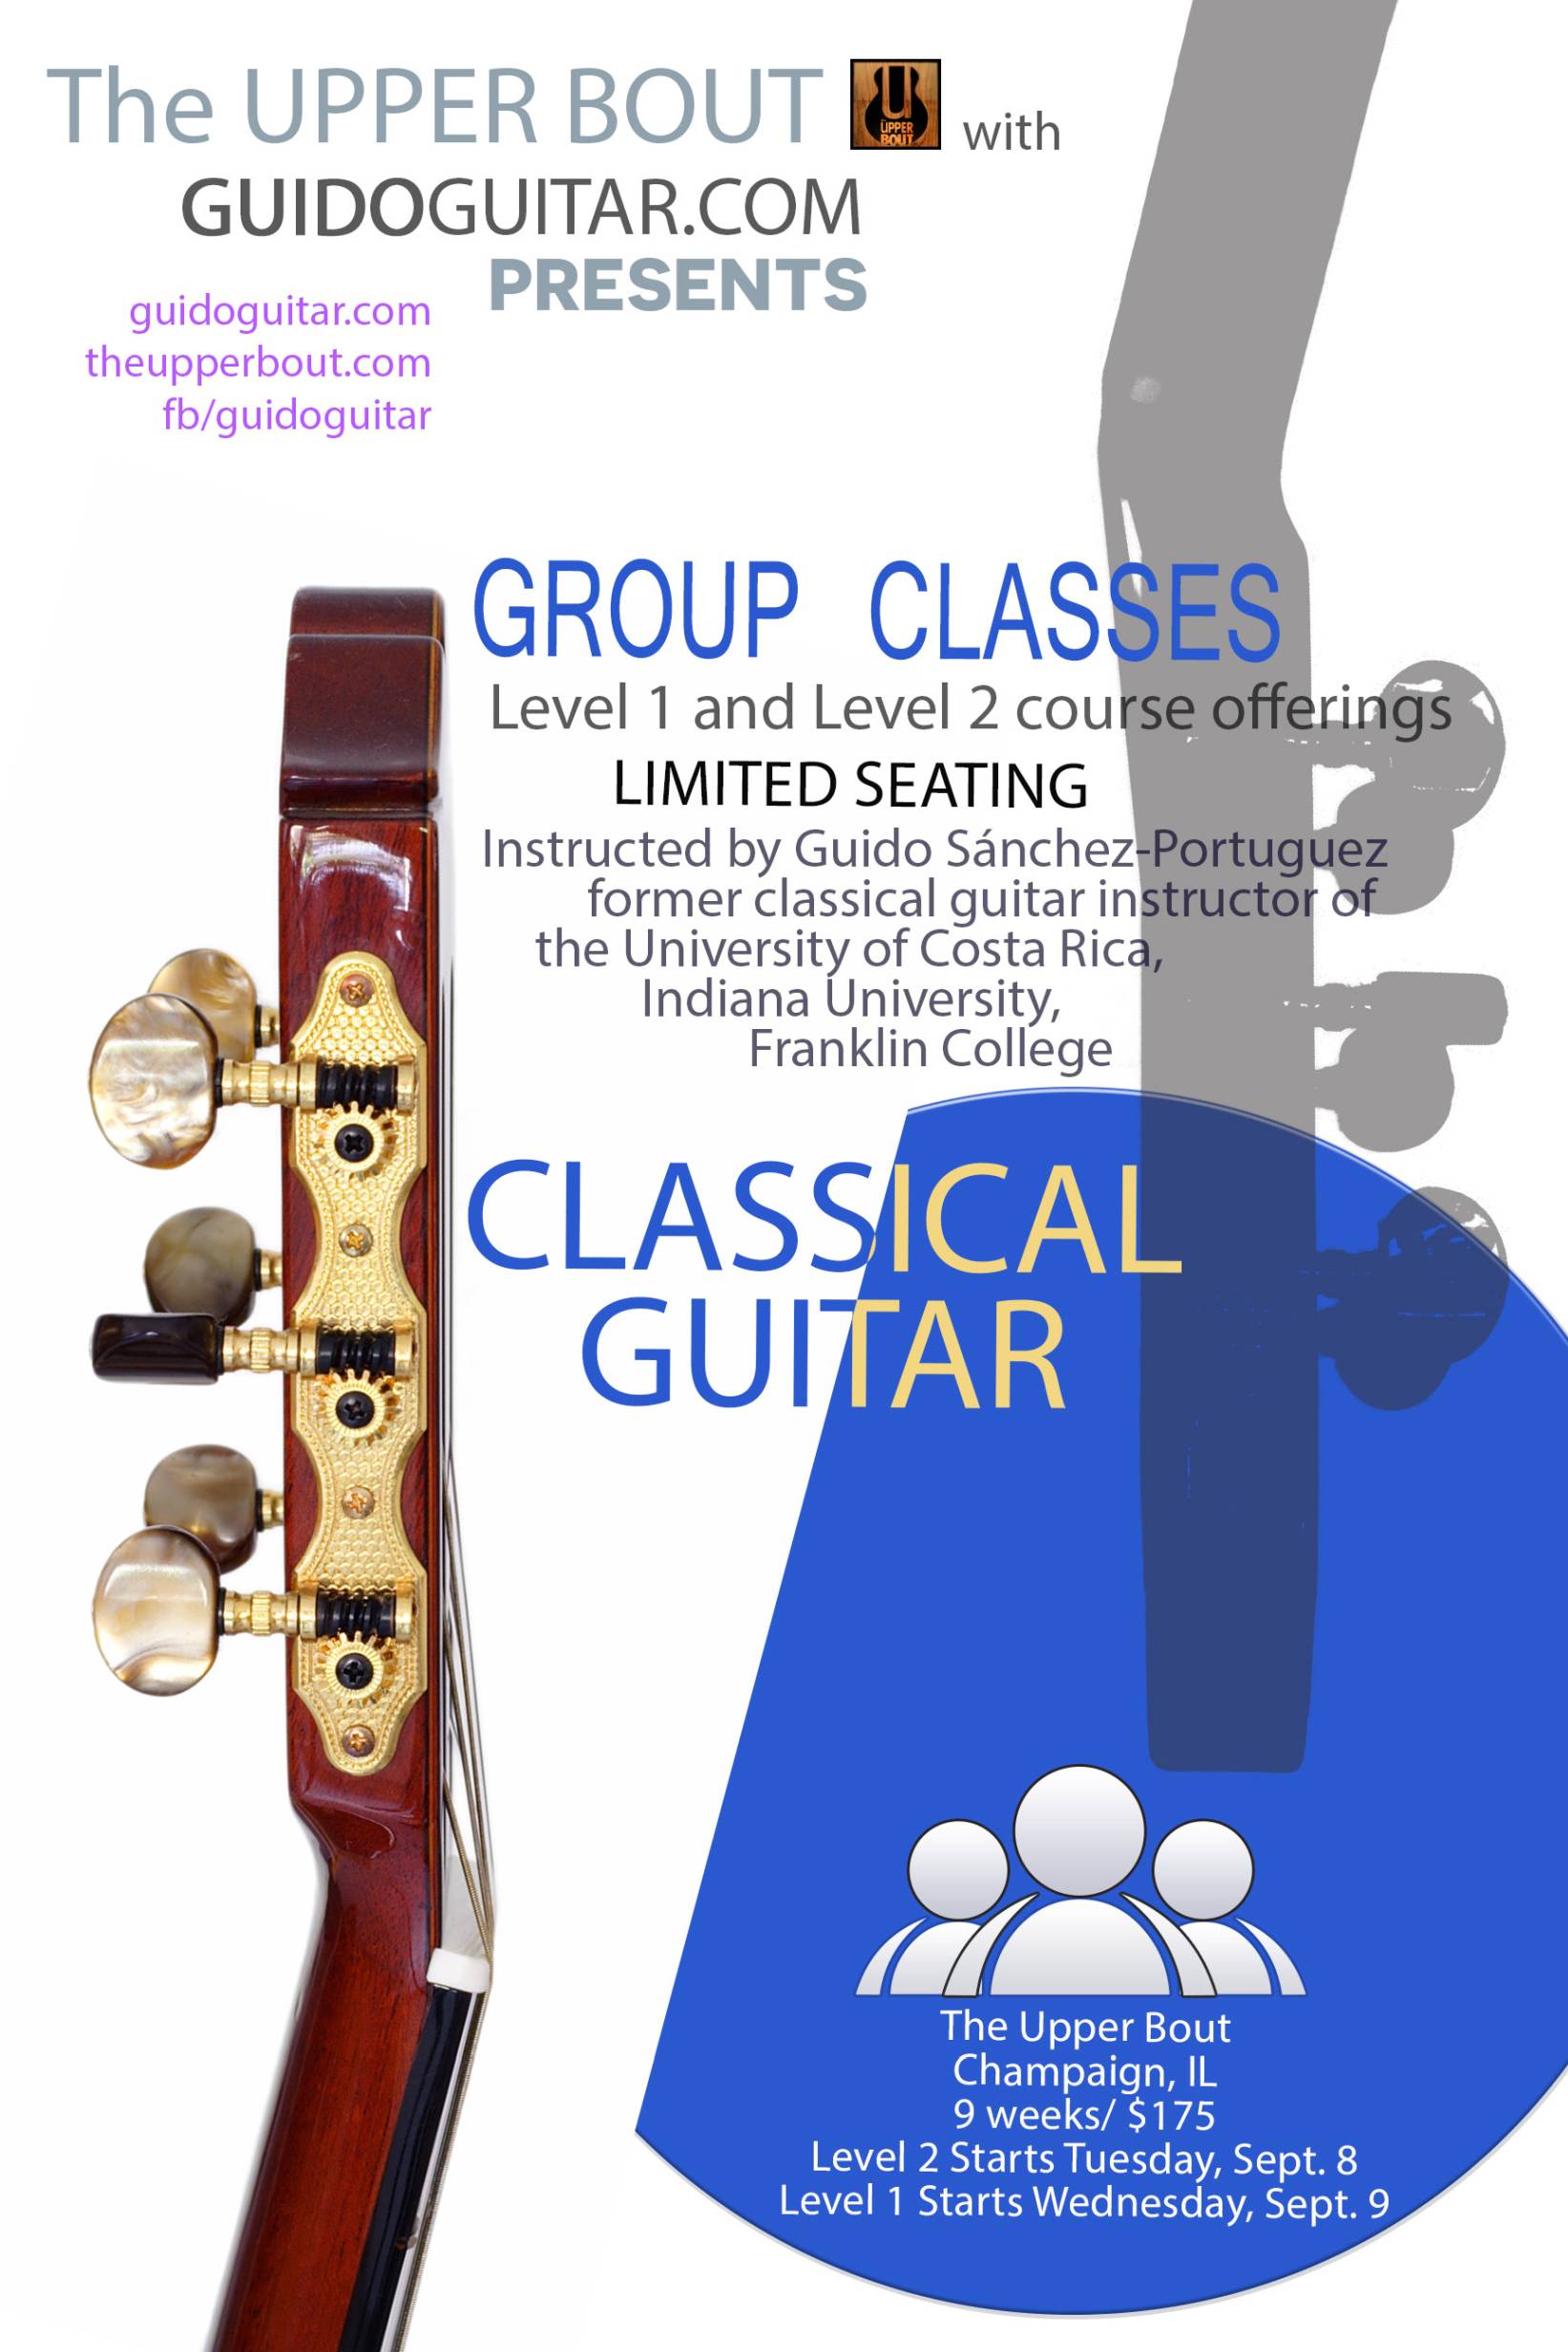 The Upper Bout now offering group guitar classes